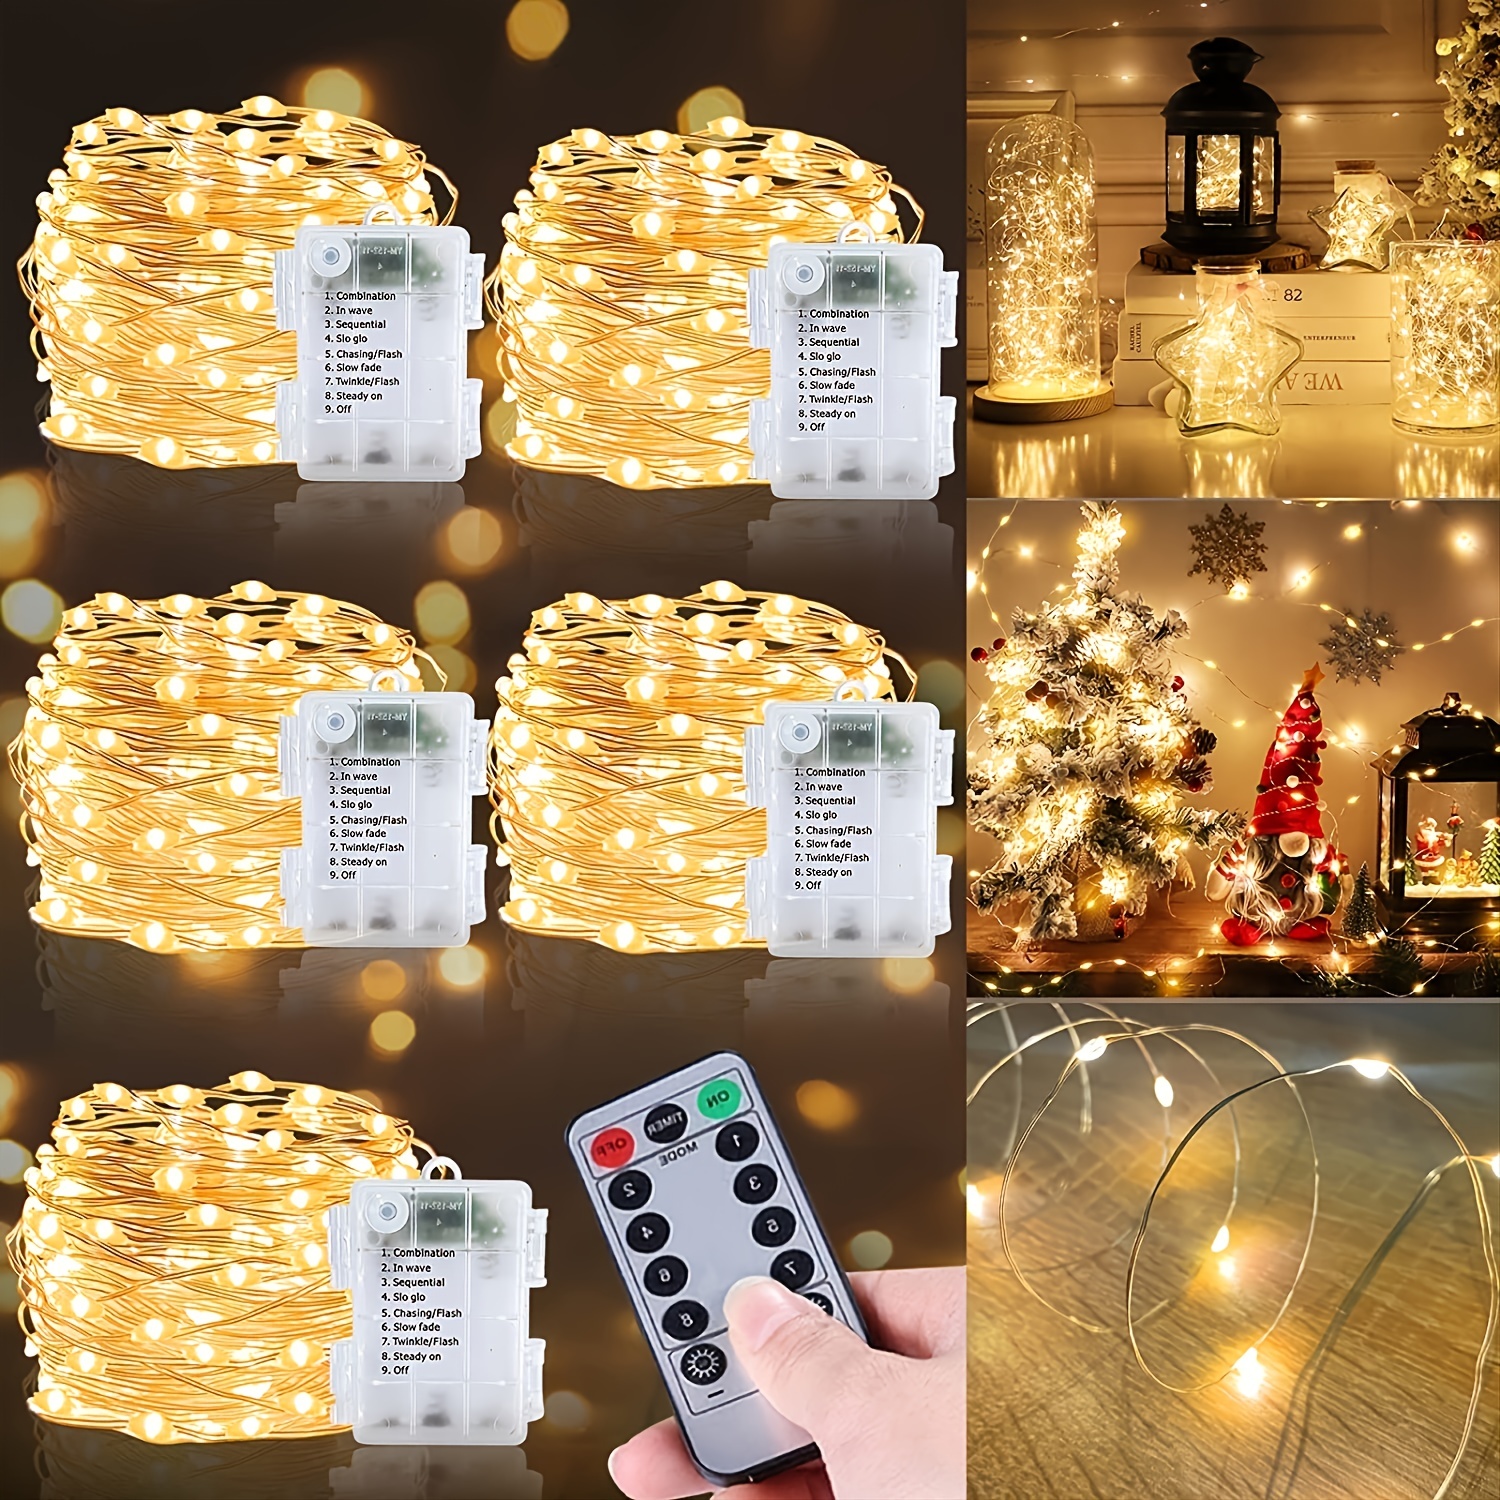 1 Roll Of 50 LEDs Fairy Lights 33ft Battery Powered Fairy String Lights With 8 Light Modes Waterproof LED String Lights For Outdoor Indoor Bedroom Wedding Party Decor Battery Not Included